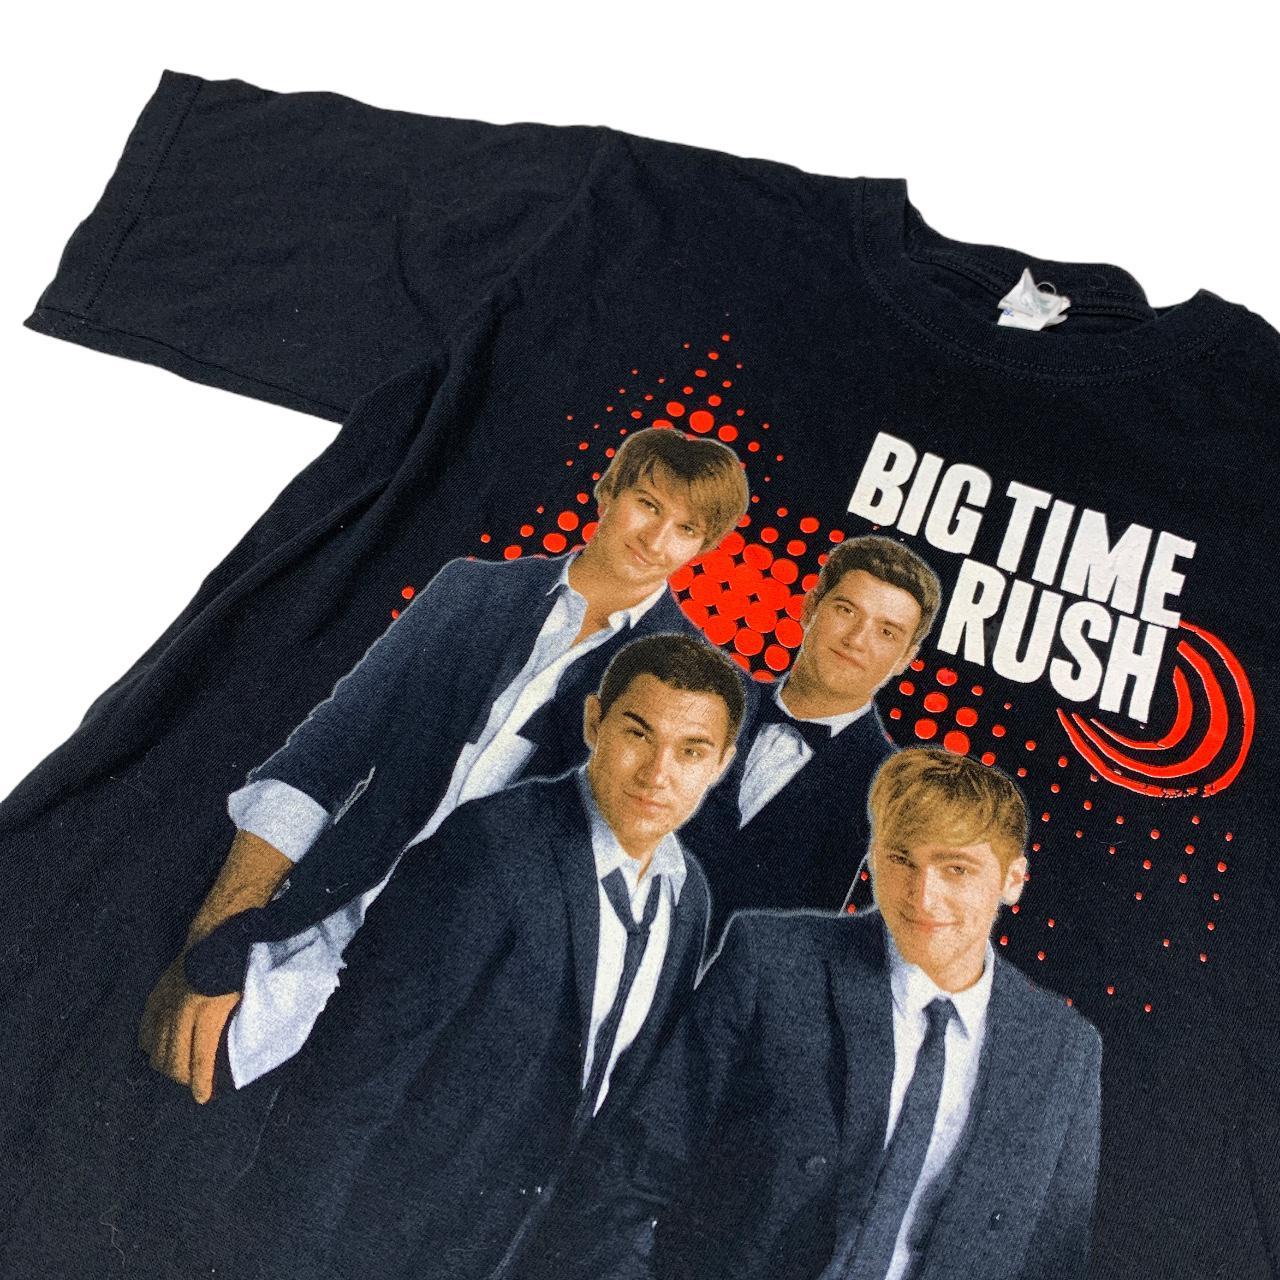 Product Image 3 - BTR TEE

This late y2k era